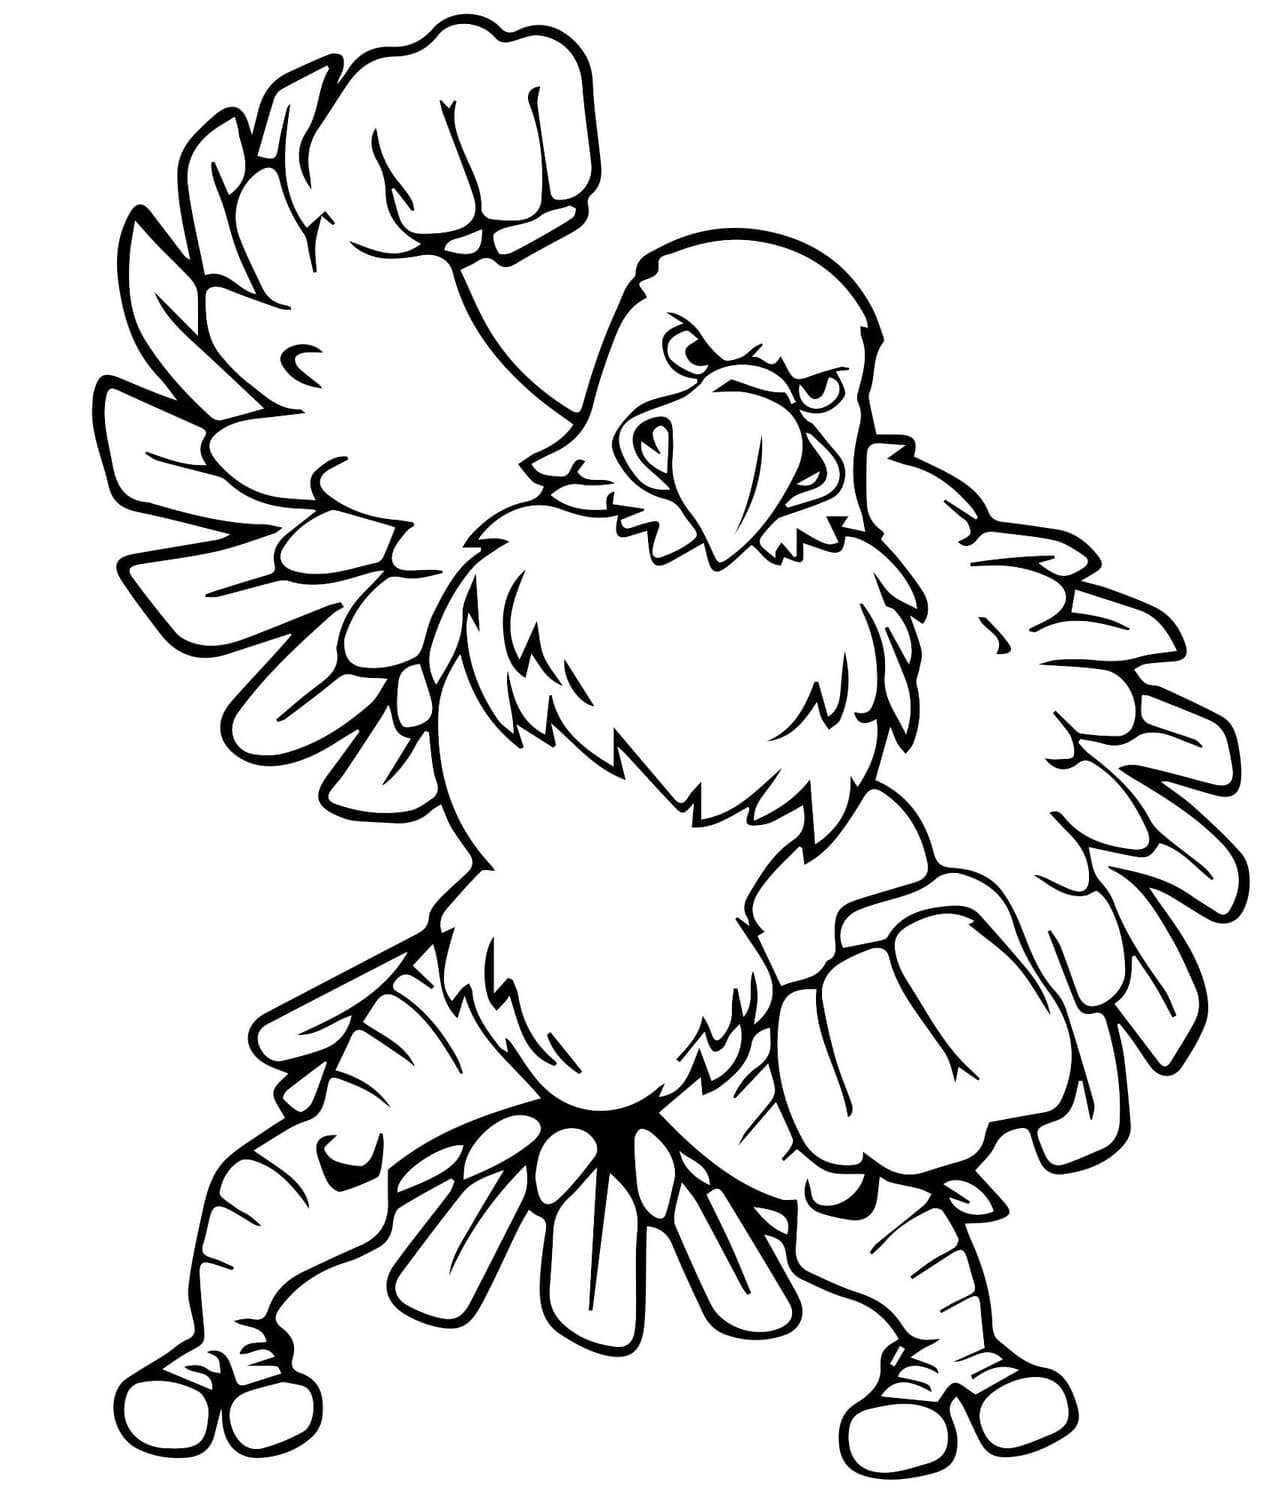 Bald eagle coloring pages printable for free download